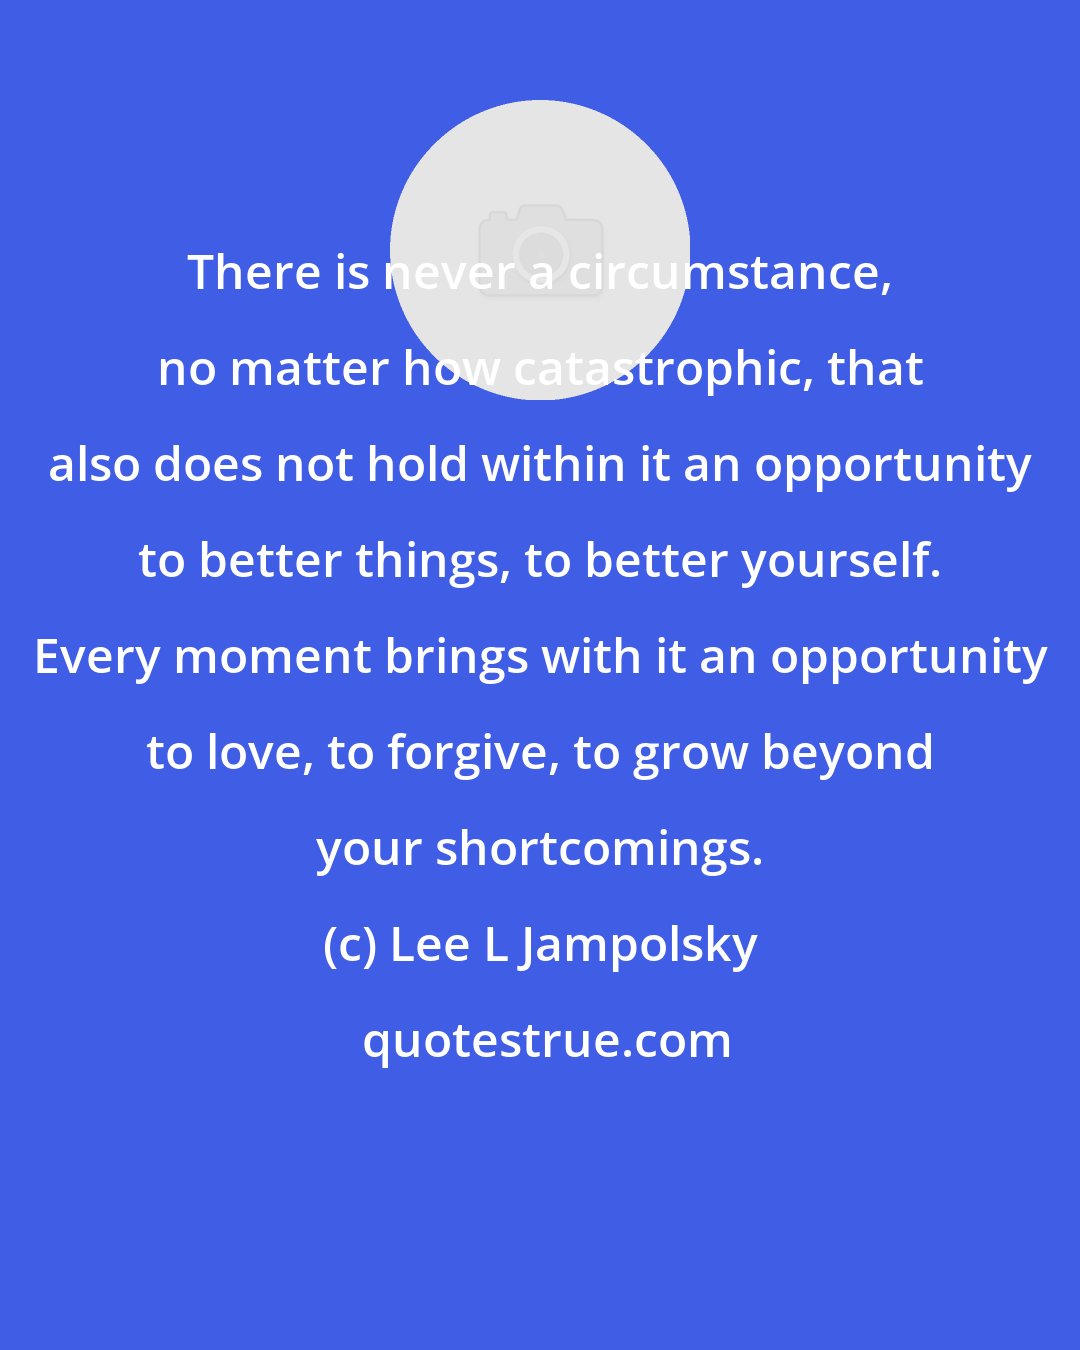 Lee L Jampolsky: There is never a circumstance, no matter how catastrophic, that also does not hold within it an opportunity to better things, to better yourself. Every moment brings with it an opportunity to love, to forgive, to grow beyond your shortcomings.